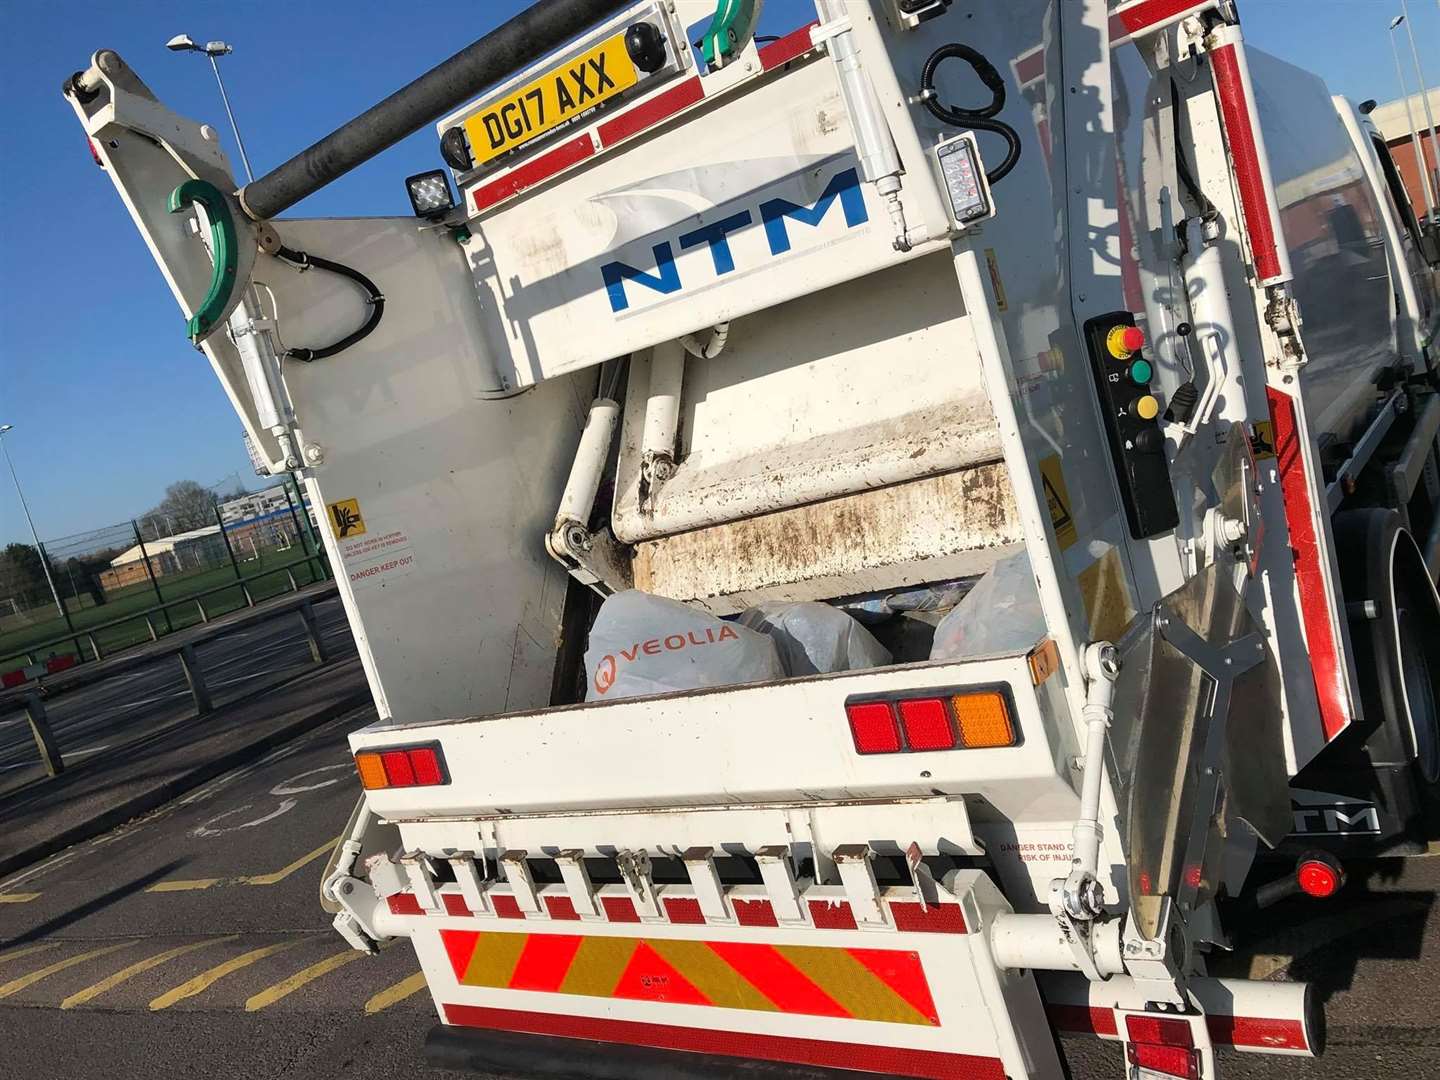 Veolia is the contractor responsible for bin collections